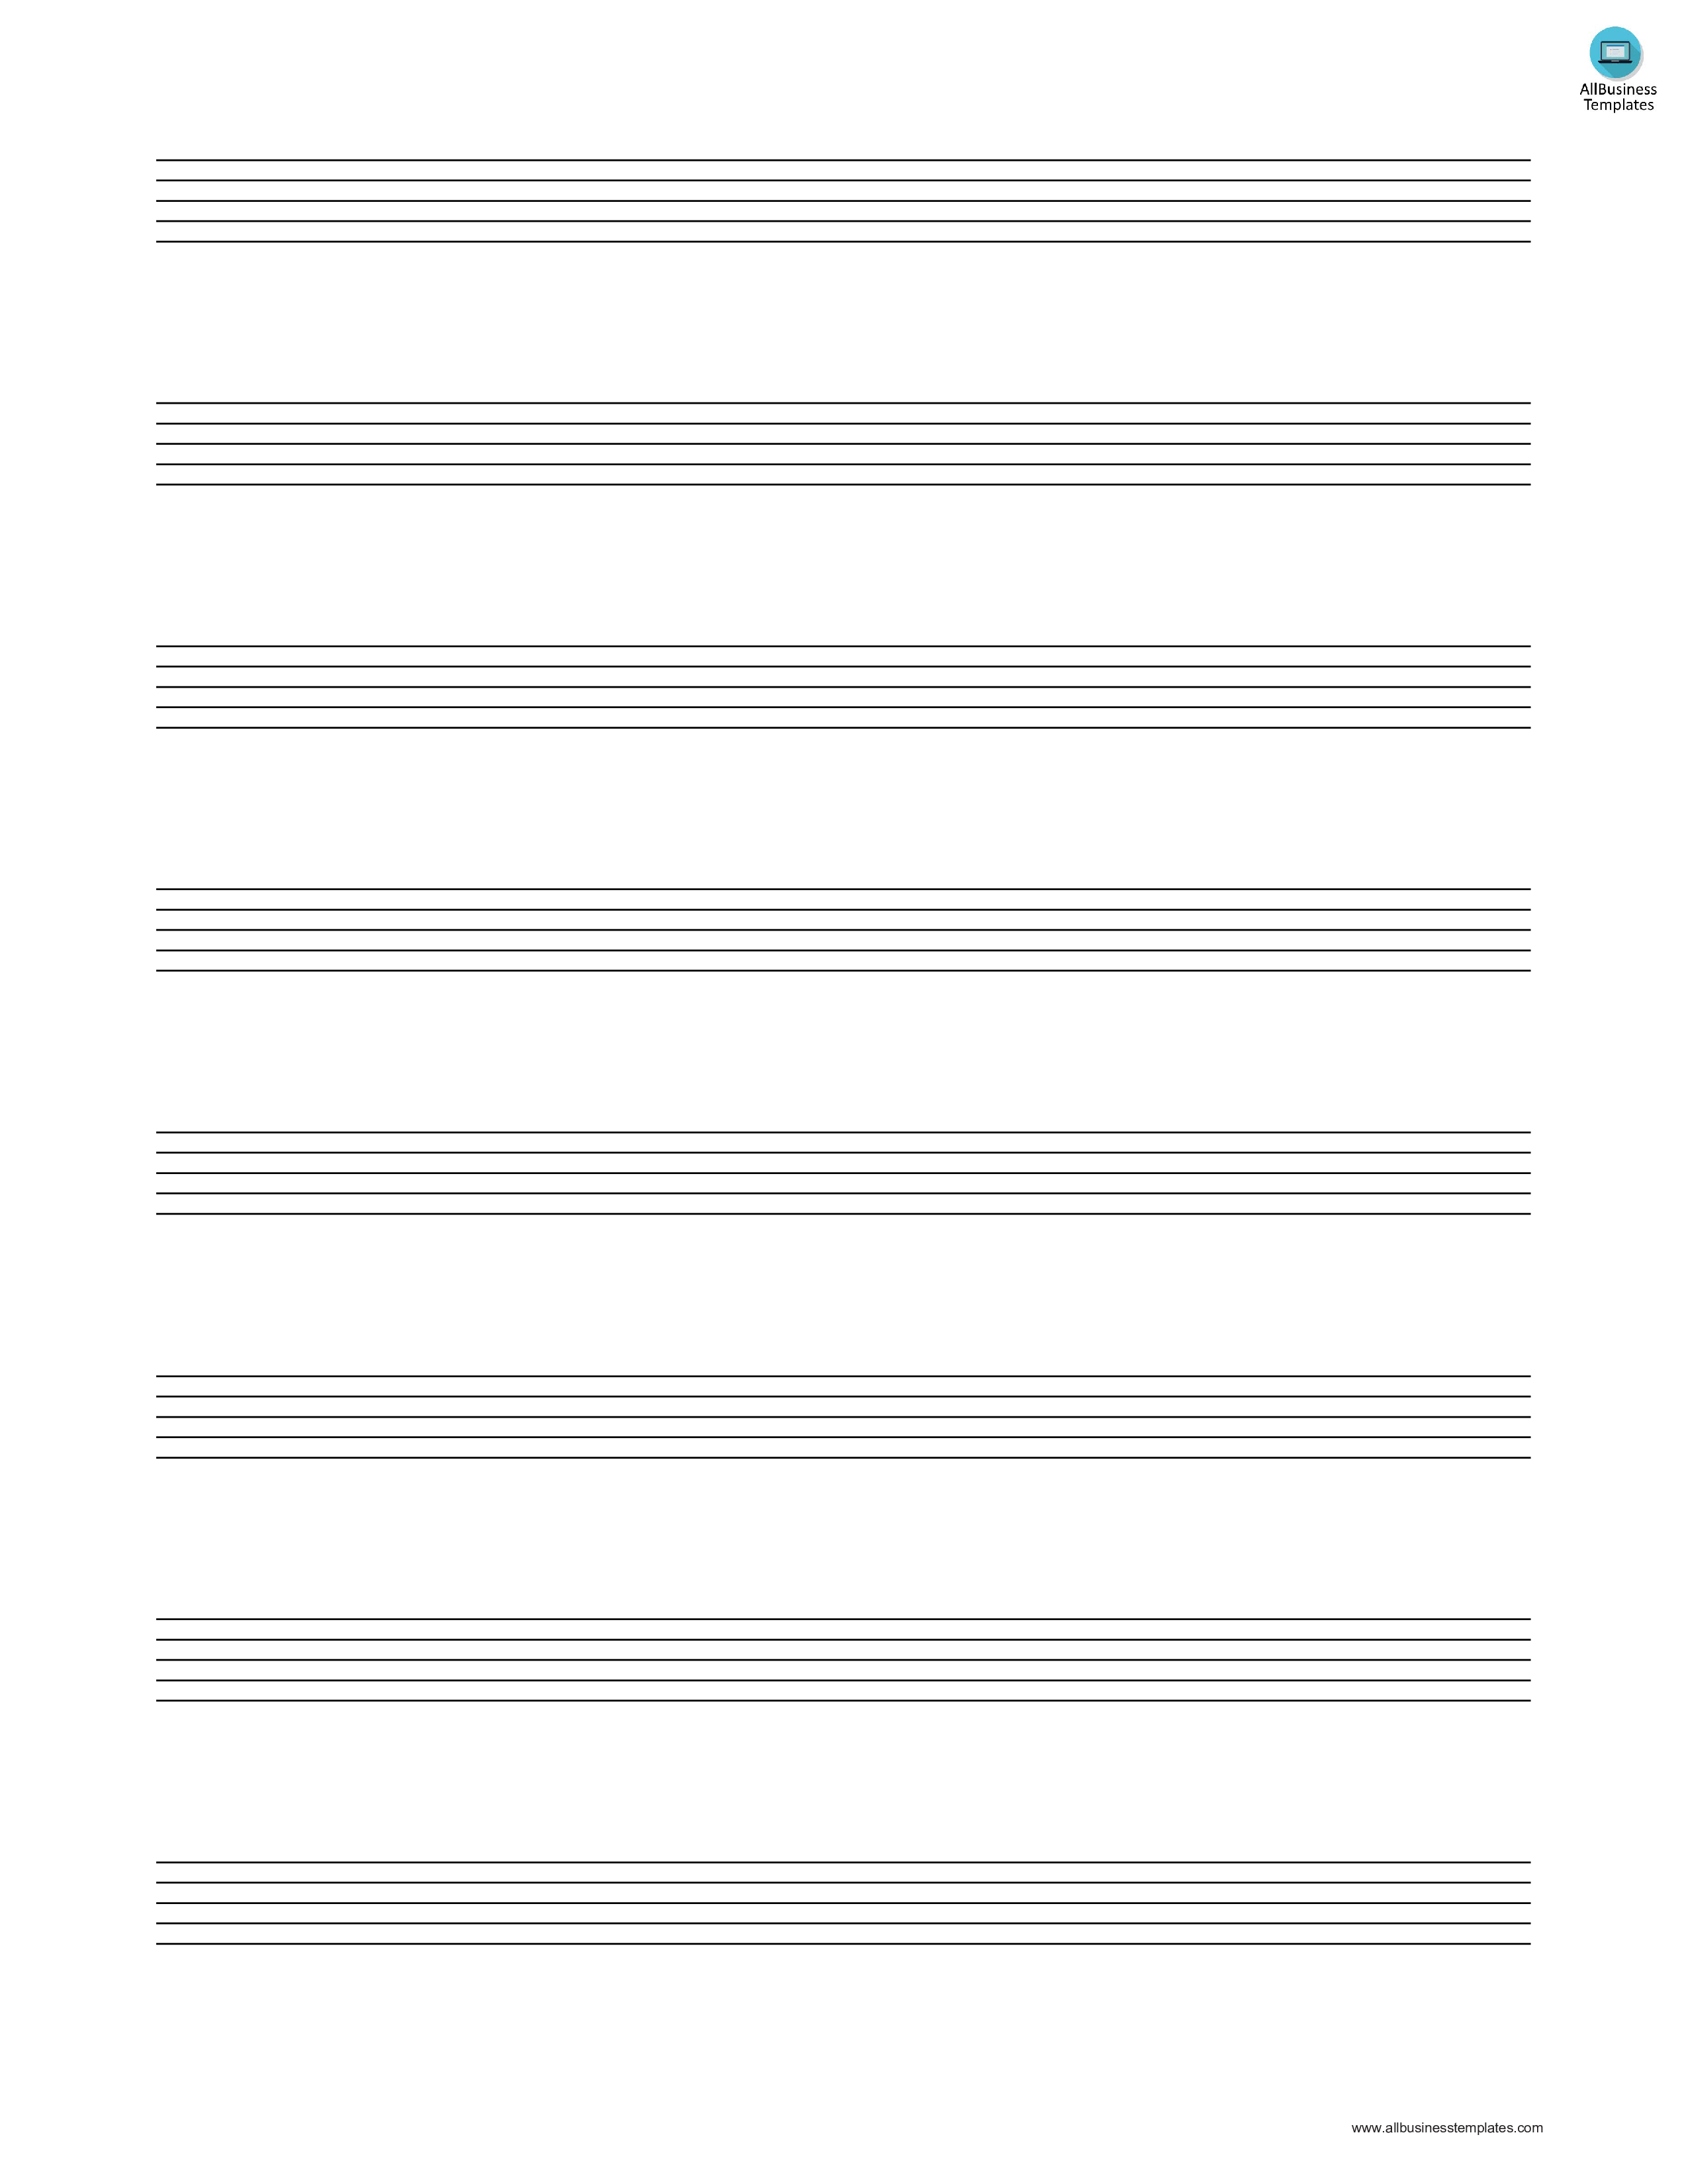 1 staff 8 music letter staff paper template